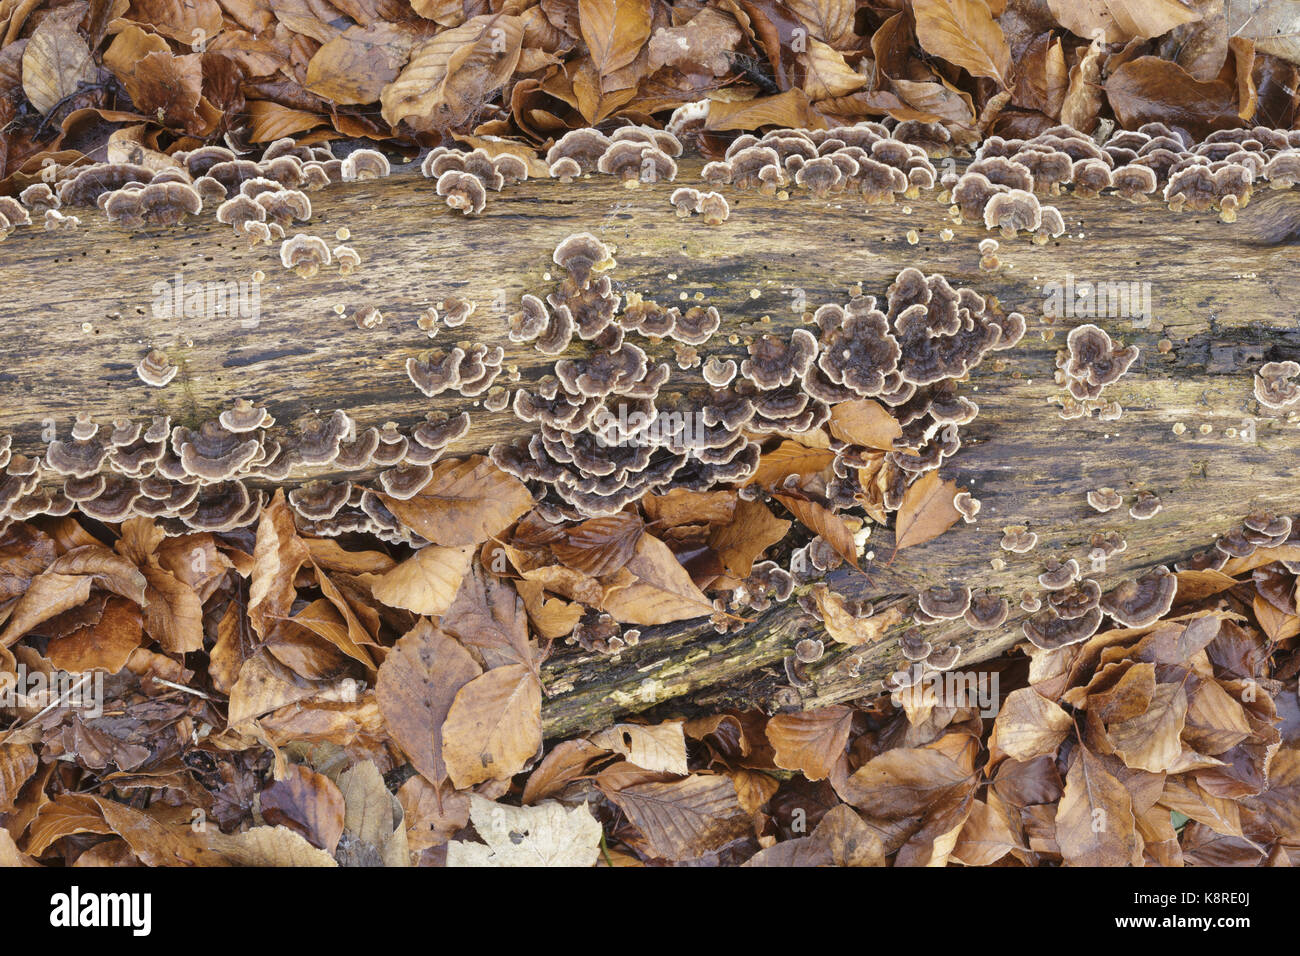 Banded Polypore (Trametes versicolor) fruiting bodies, growing on decaying branch, amongst Common Beech (Fagus sylvatica) leaves, Newfield Plantation, Stock Photo